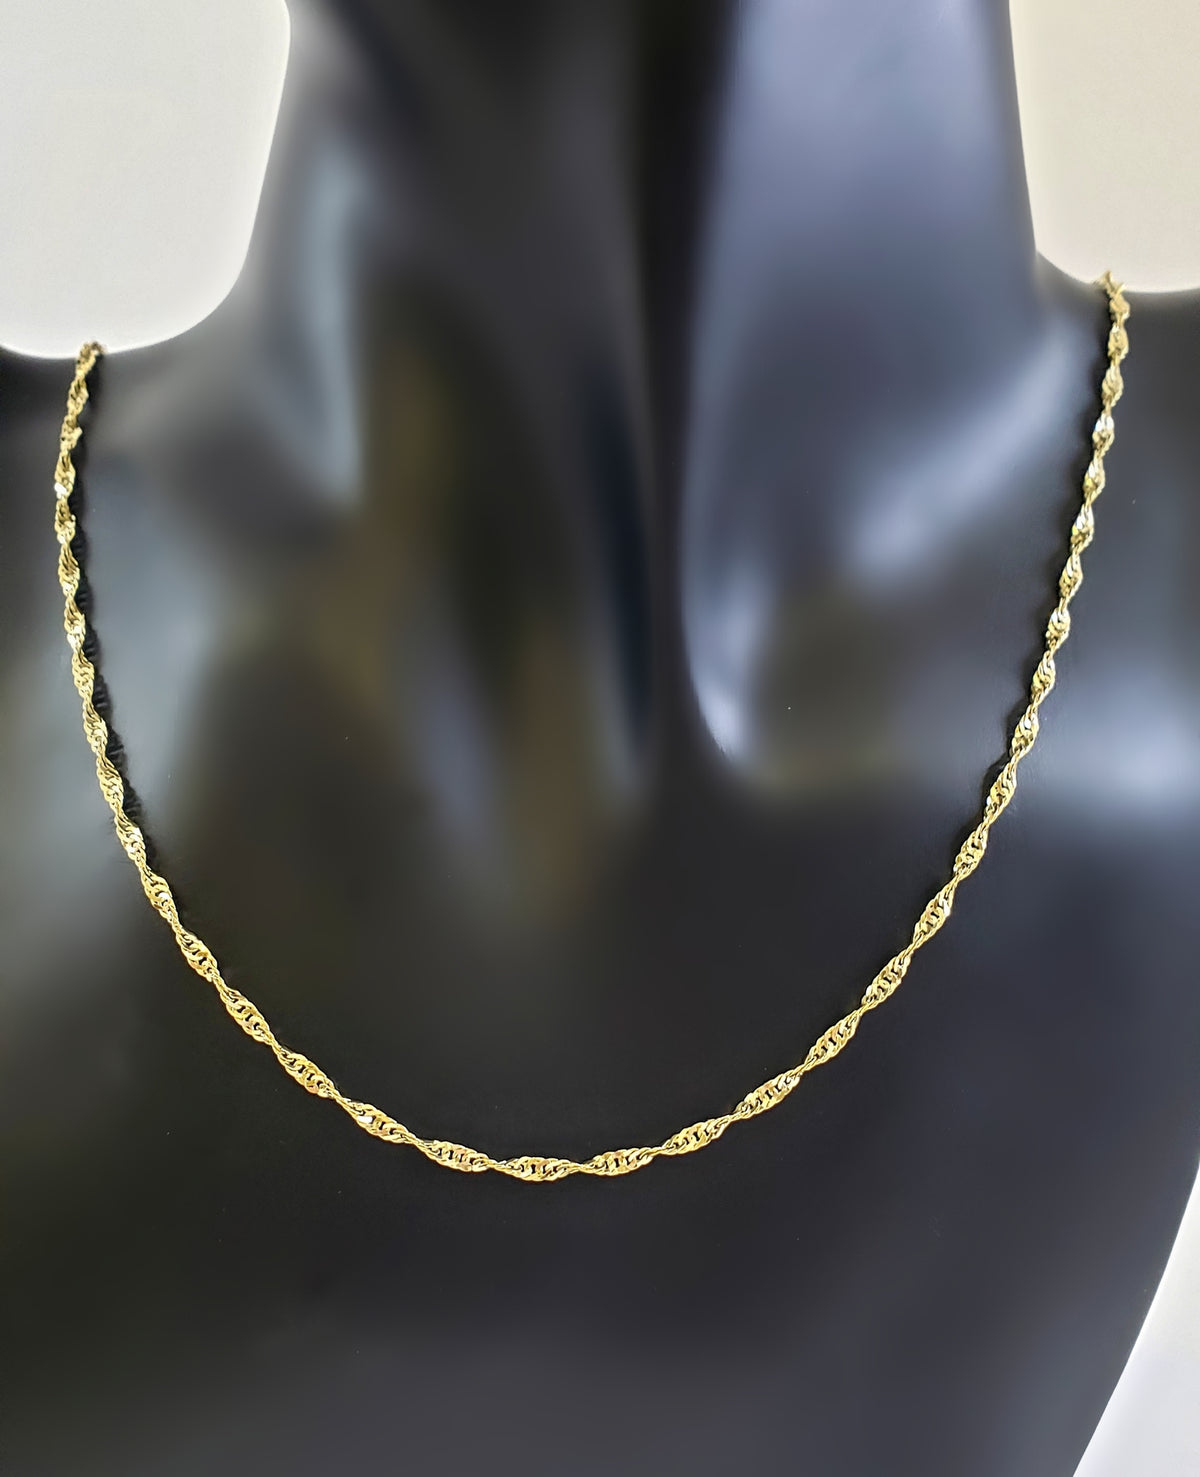 10K Yellow Gold 2mm Singapore Chain with Spring Clasp - 20 Inches